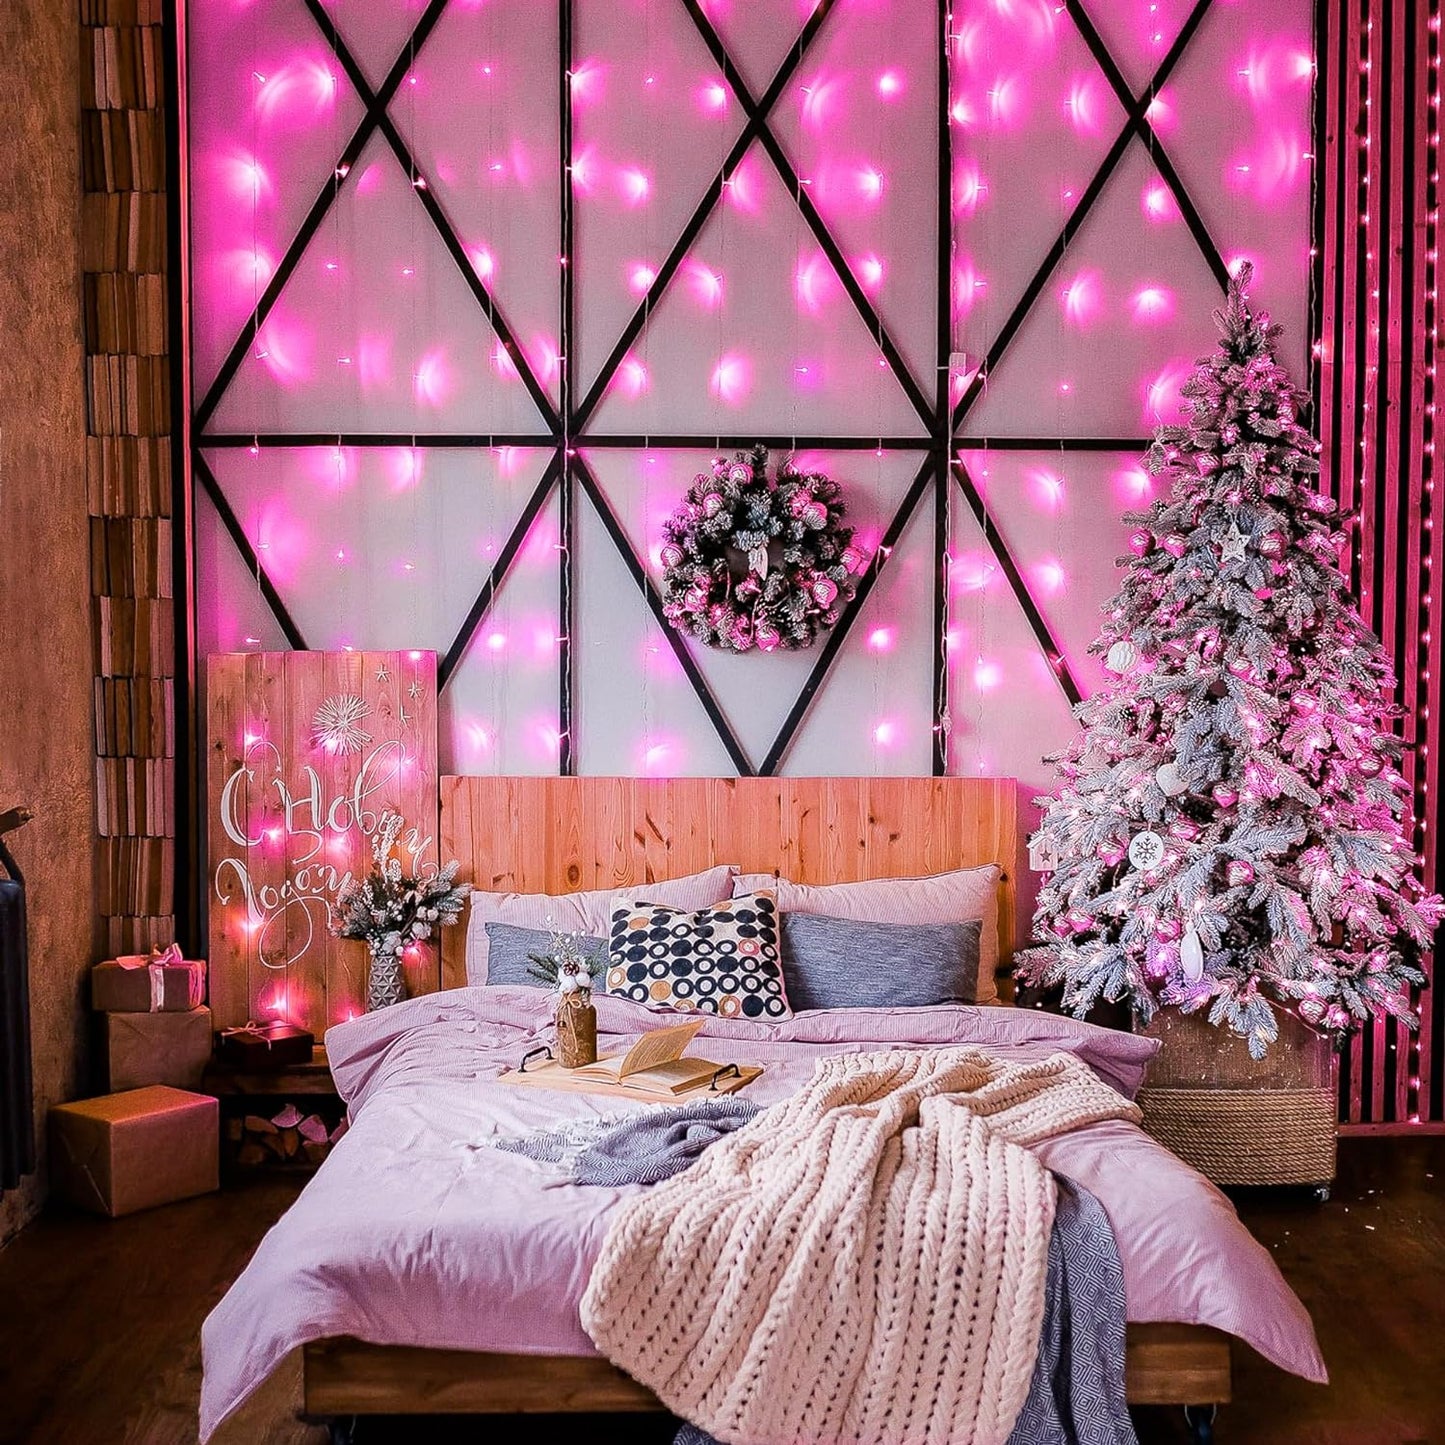 300 LED Remote Control Pink Curtain Lights, 8 Modes Pink Valentine Lights, Pink String Lights for Bedroom Window Wall Party Backdrop Valentine Decorations (9.8X9.8Ft)